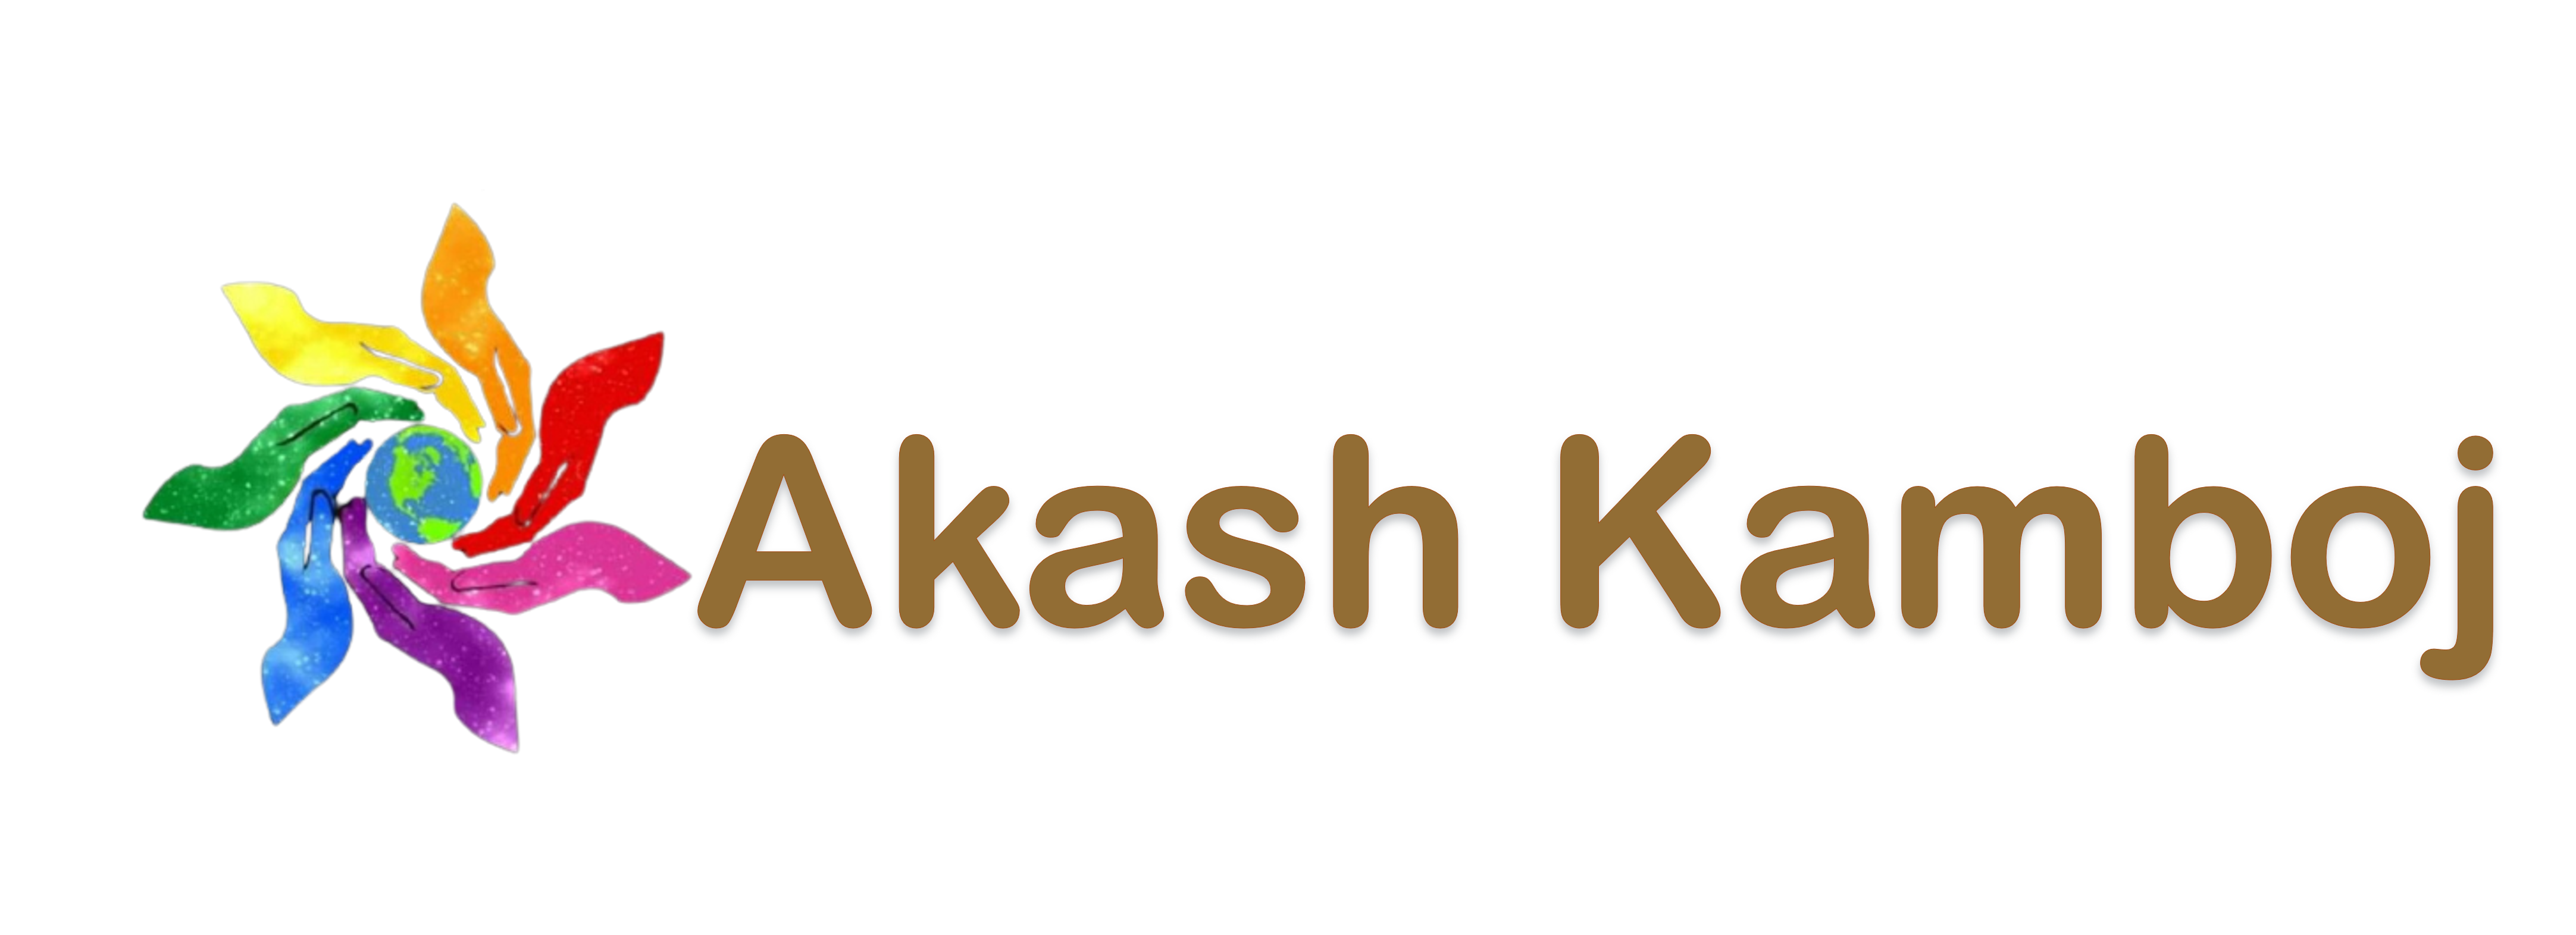 Akash Kamboj is an established certified healer in Past Life Regression, Akashic Records, and is a Channlist, Automatic Writer, and Hypnotherapist. Based in faridabad